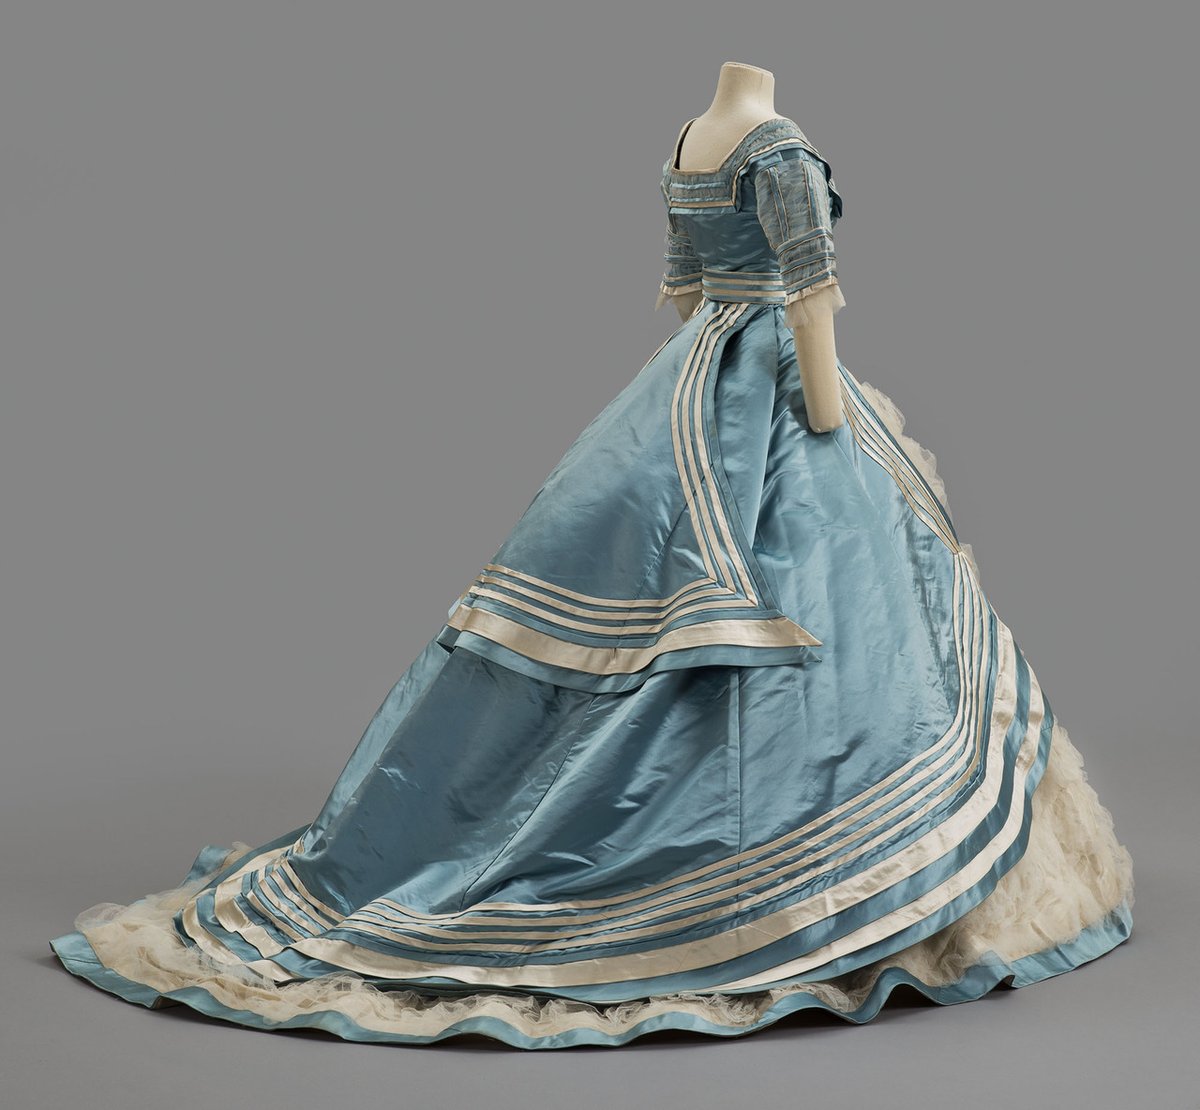 By 1868, the fullness of women's skirts had moved to the back, and a bustle was needed to support fashionable puffed overskirts and large sashes. The high back interest continued in the early 1870s as the bustle gradually swelled in size.